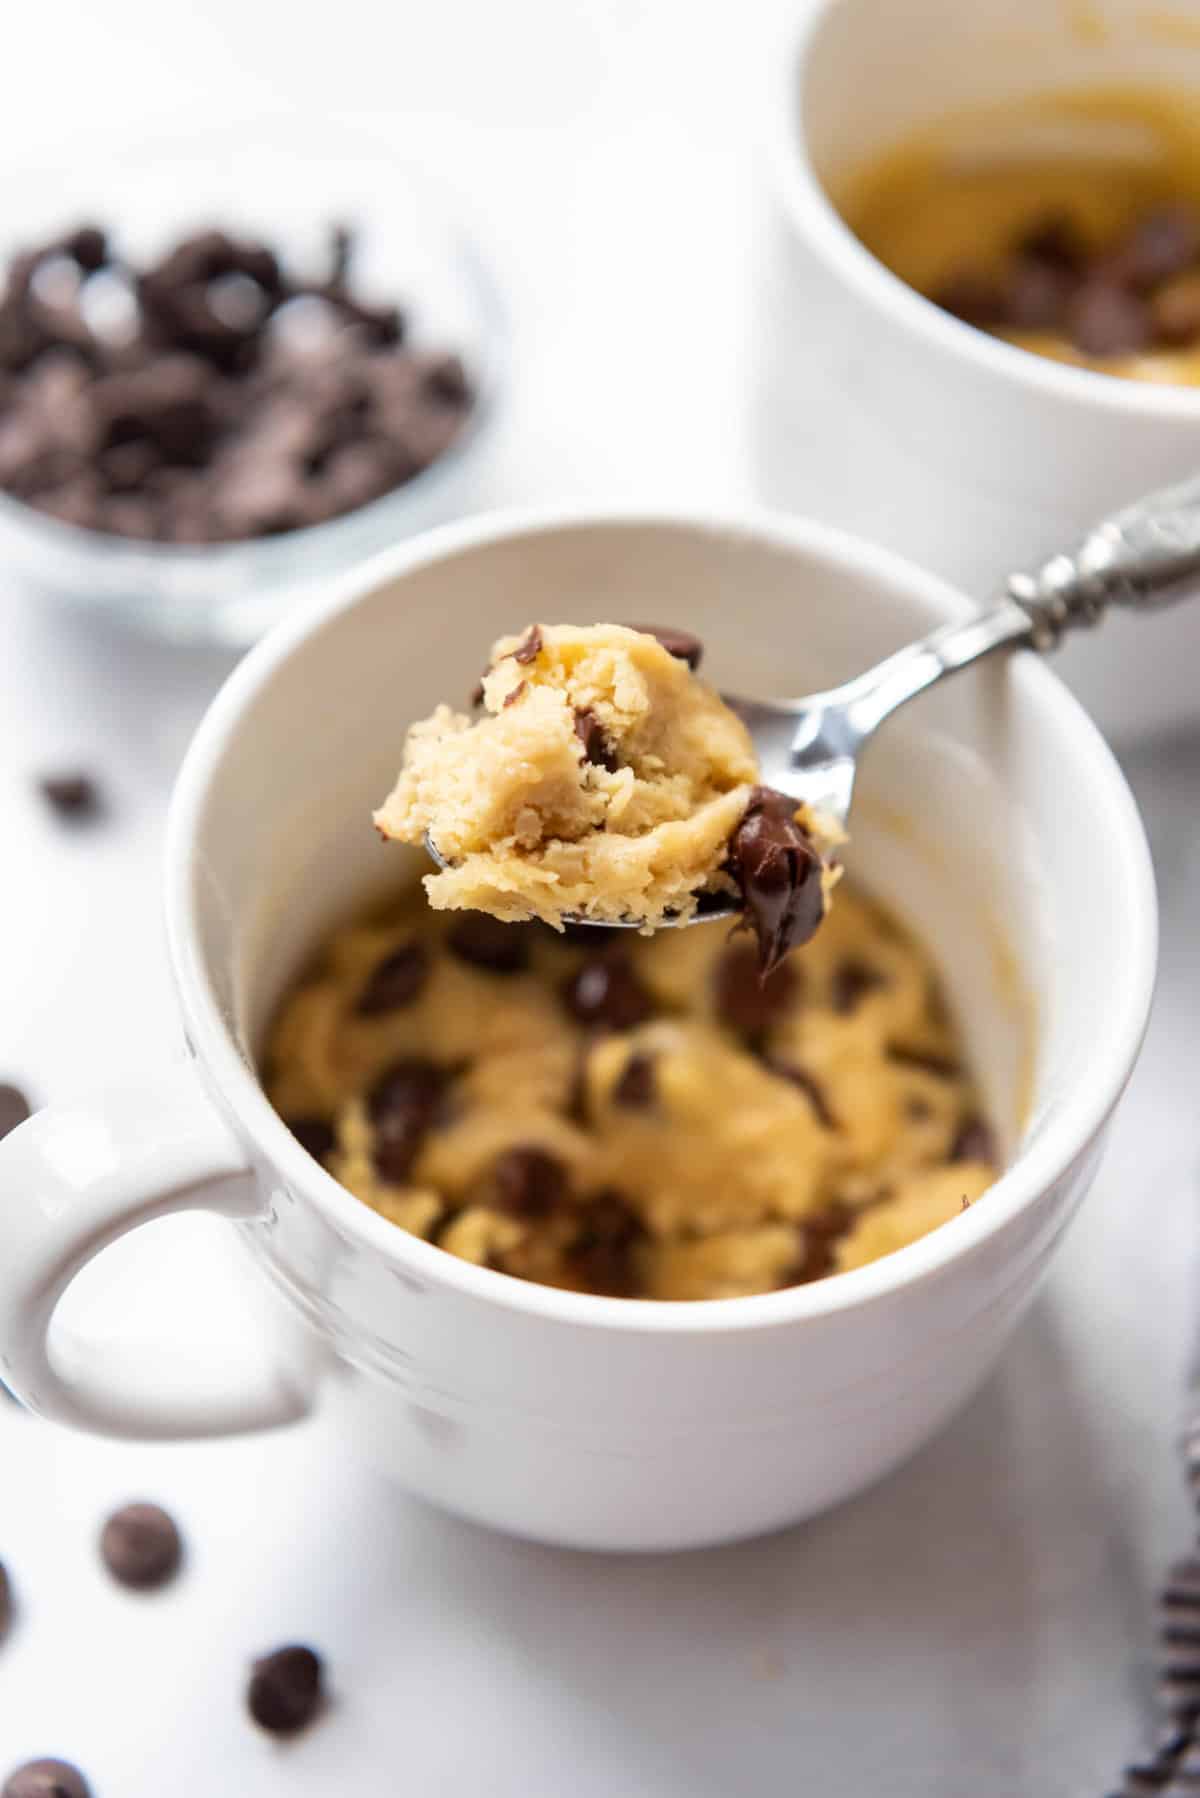 A spoon lifting a bite of chocolate chip cookie made in a mug.